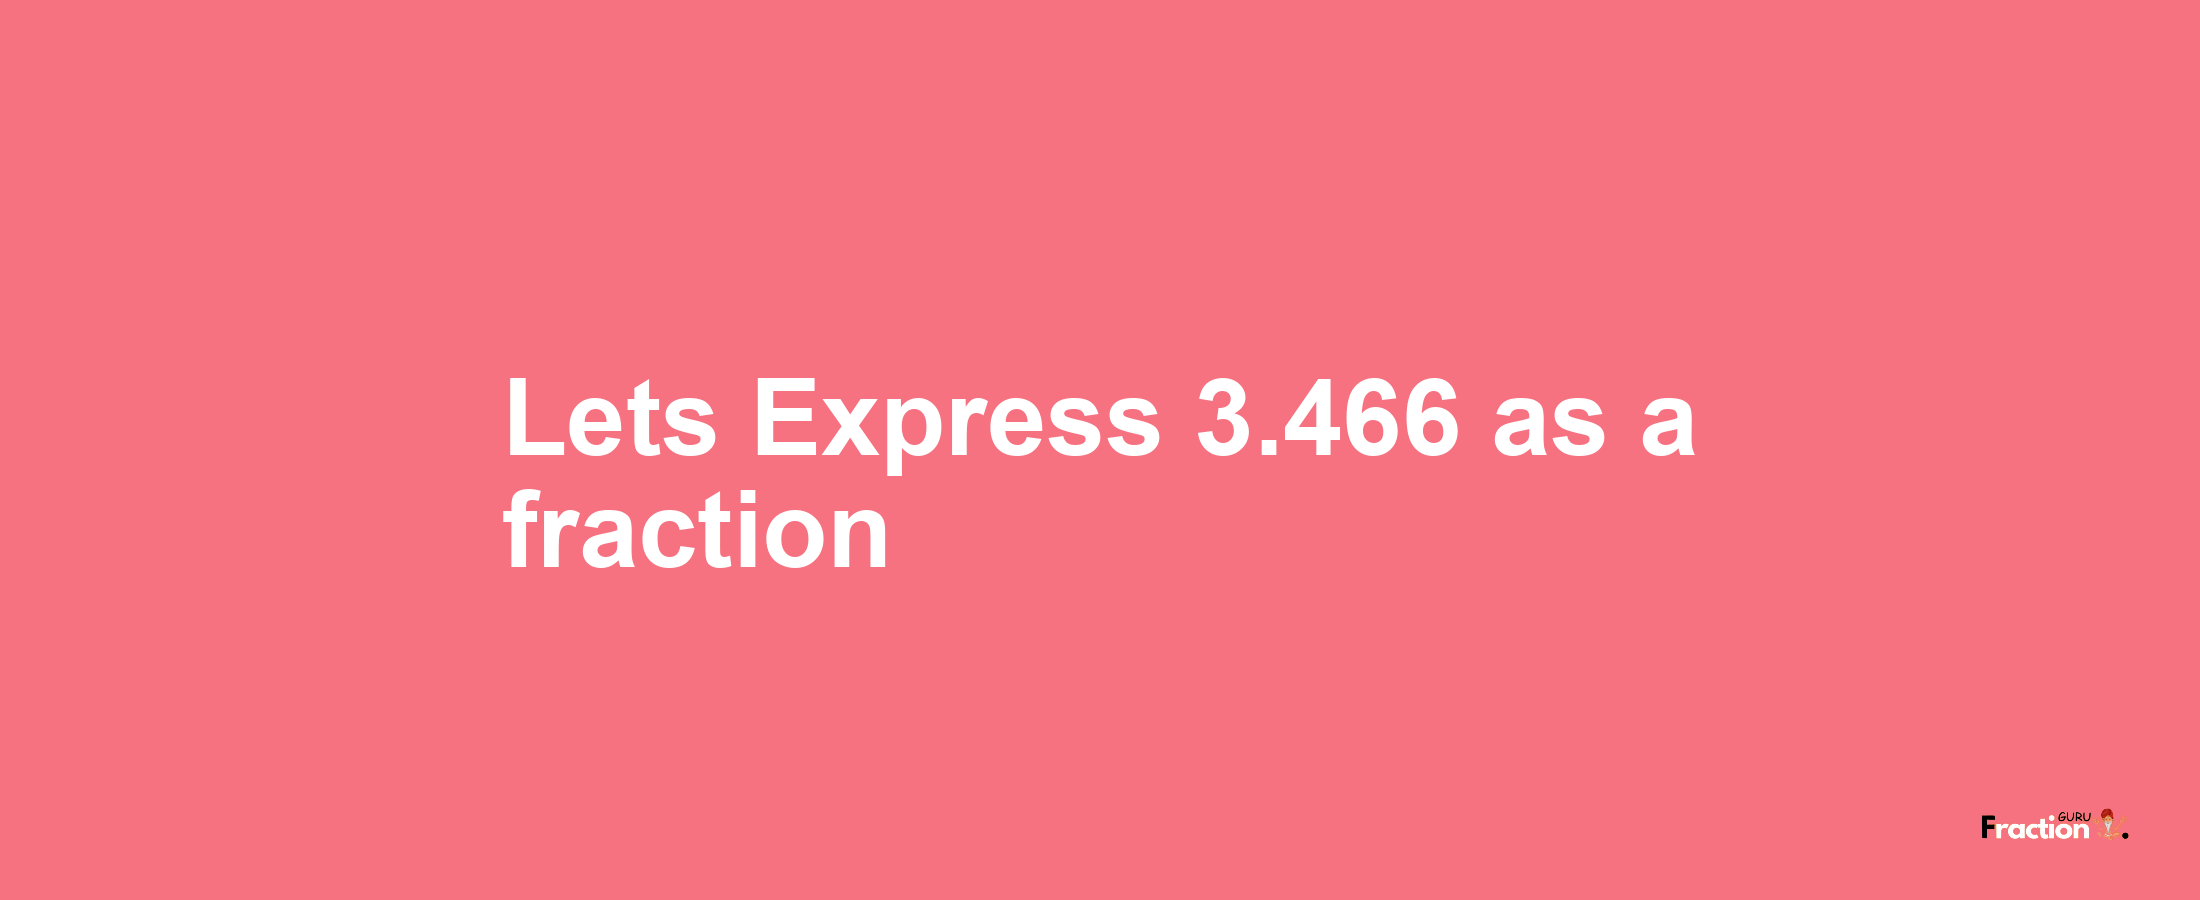 Lets Express 3.466 as afraction